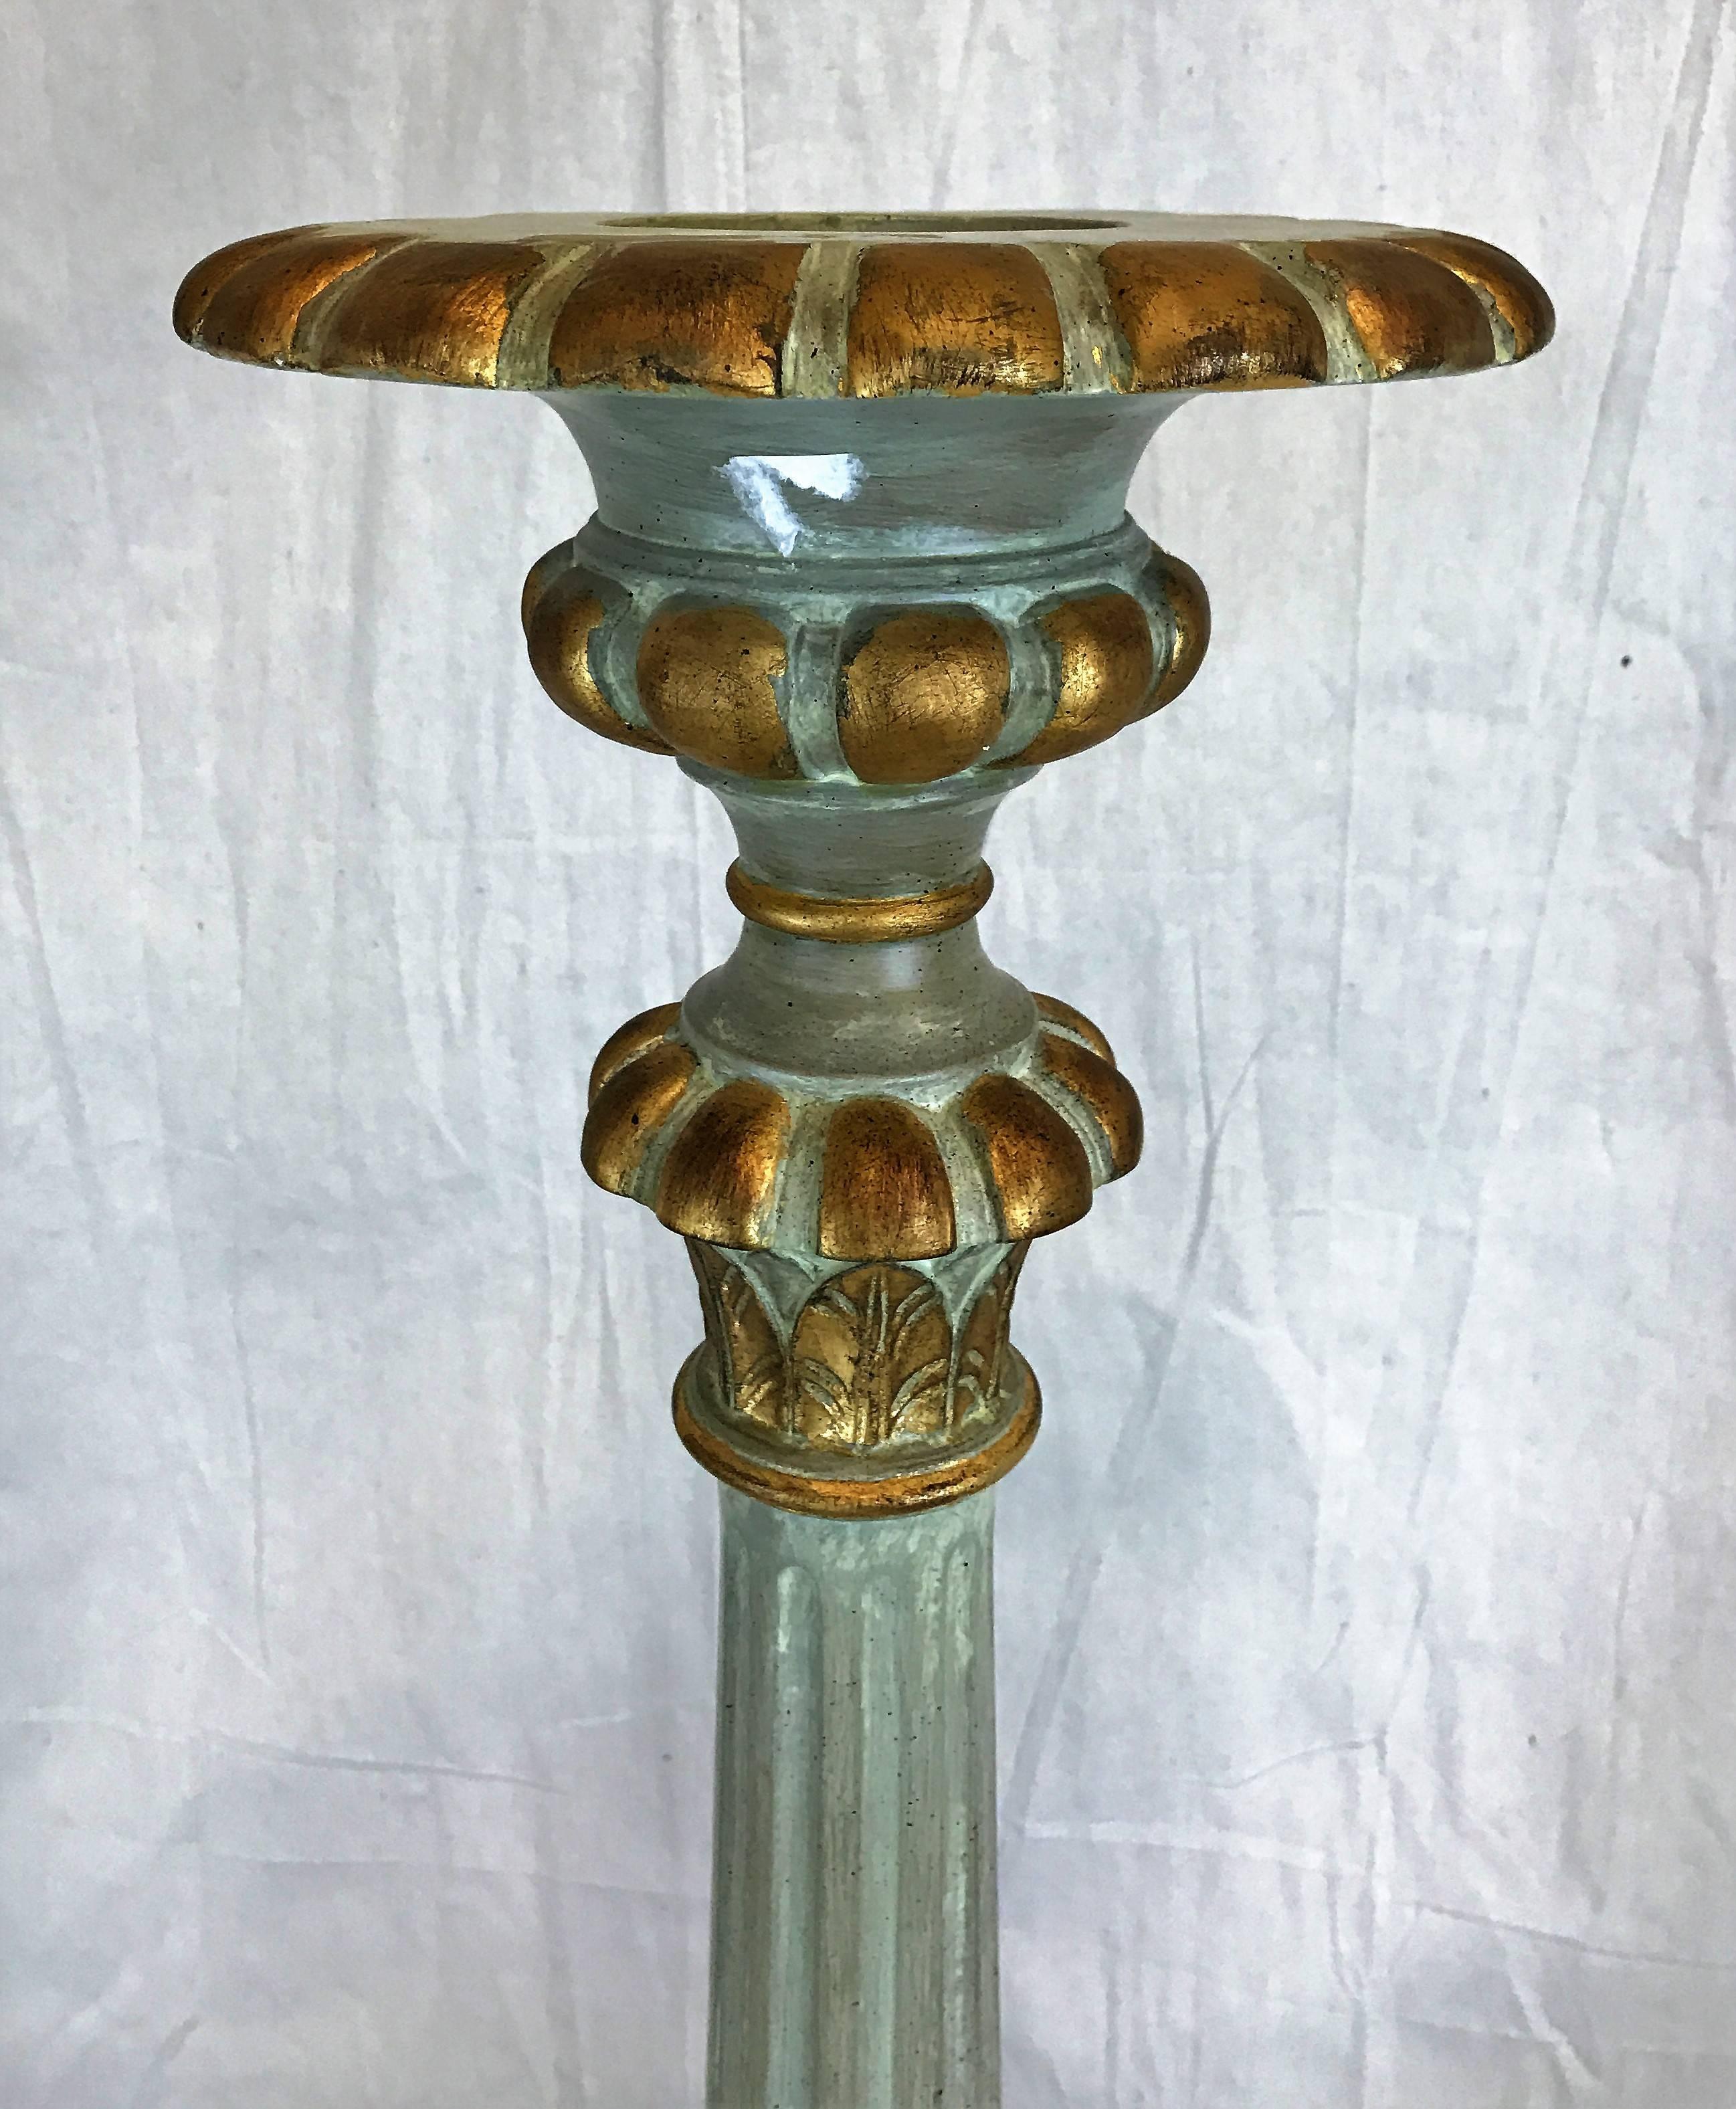 Lovely blue and gold carved 1970s, Italian candlesticks that would be lovely transformed into lighted lamps. Exquisite cherub faces grace the bottom between the cabriolet legs and claw feet. The diameter of the candle stick at the top is 10".